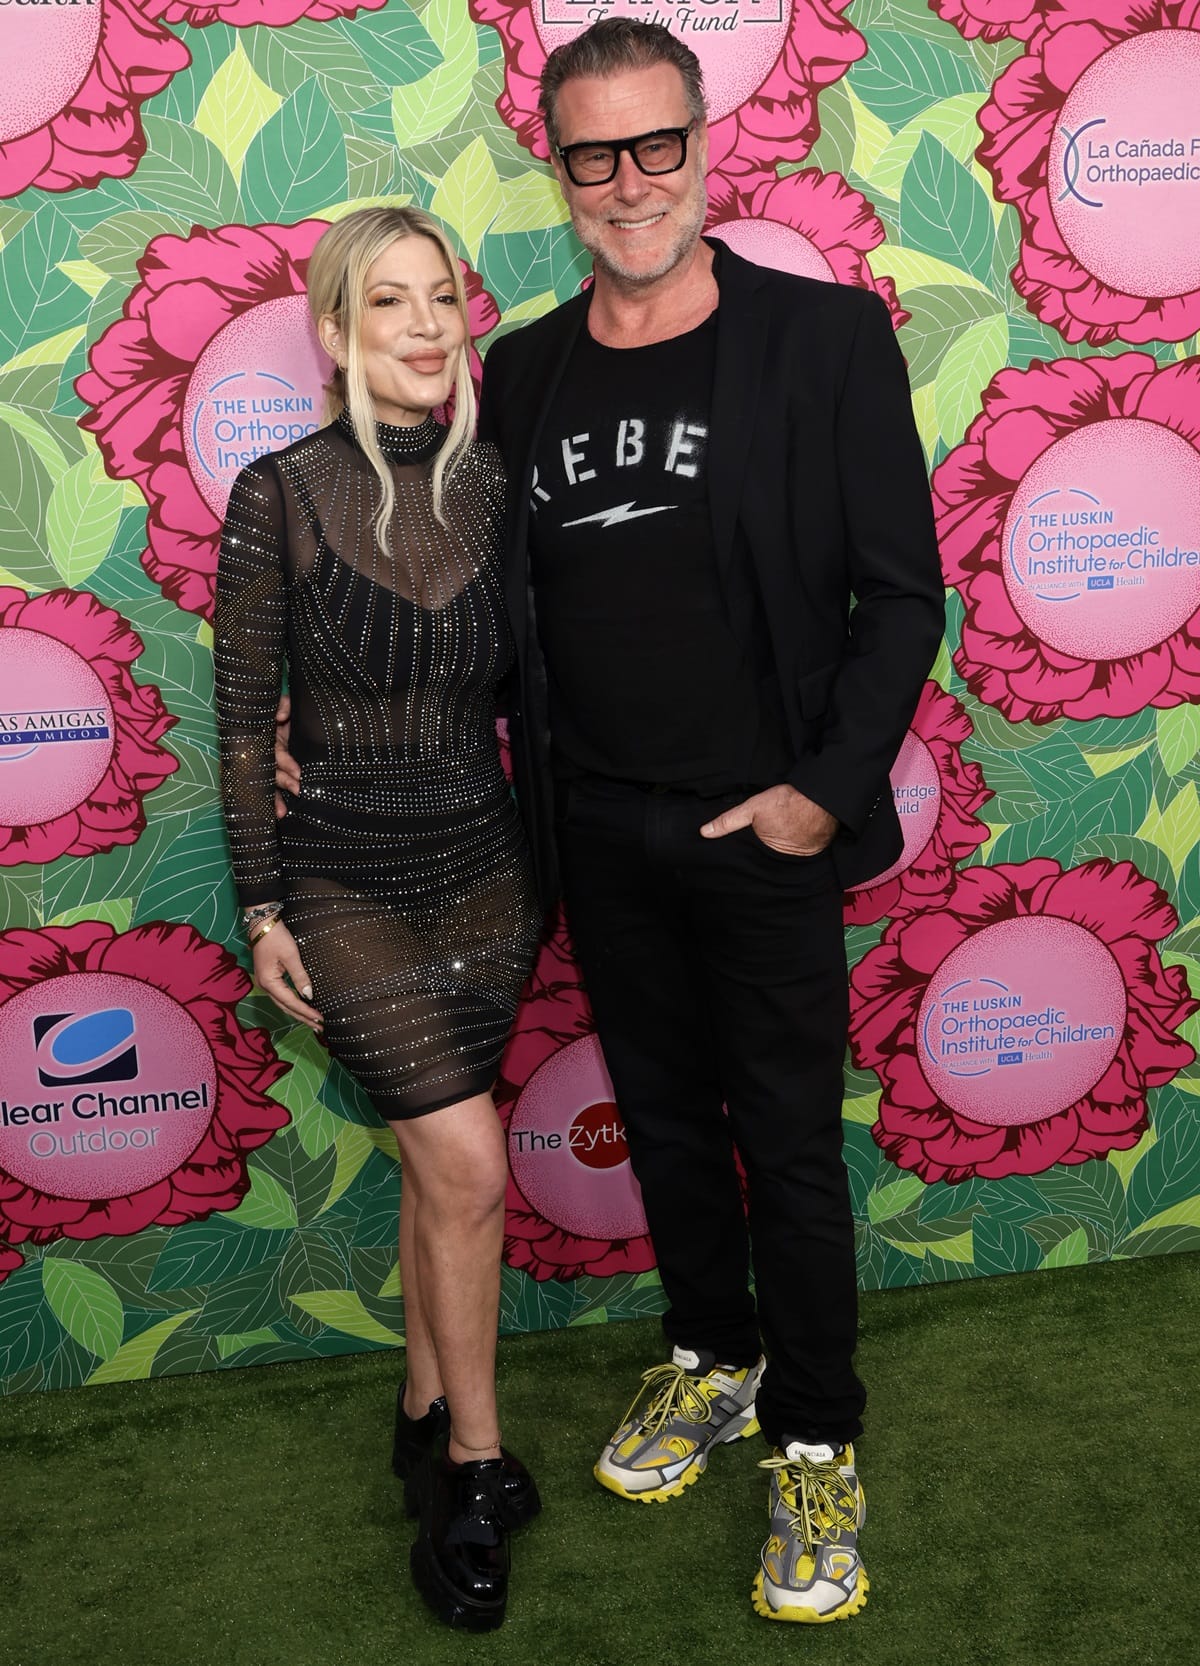 Tori Spelling and Dean McDermott met on the set of a made-for-TV movie in Ottawa, Canada in 2005, while they were both married to other people